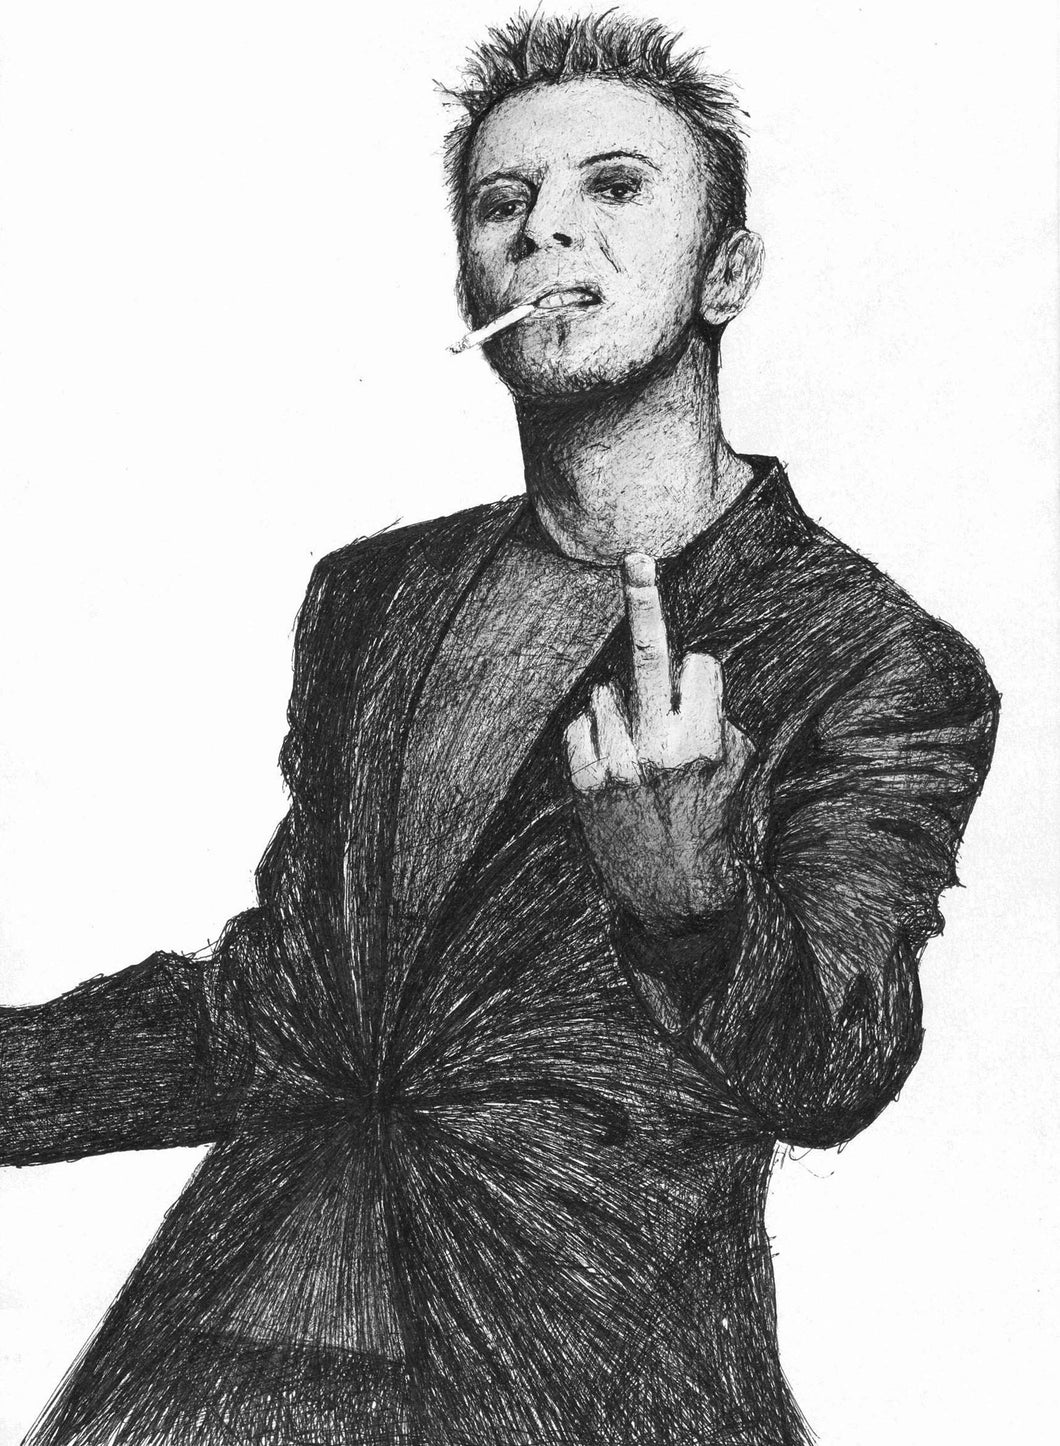 David Bowie middle finger up yours fuck you series pen drawing portrait print fan art poster